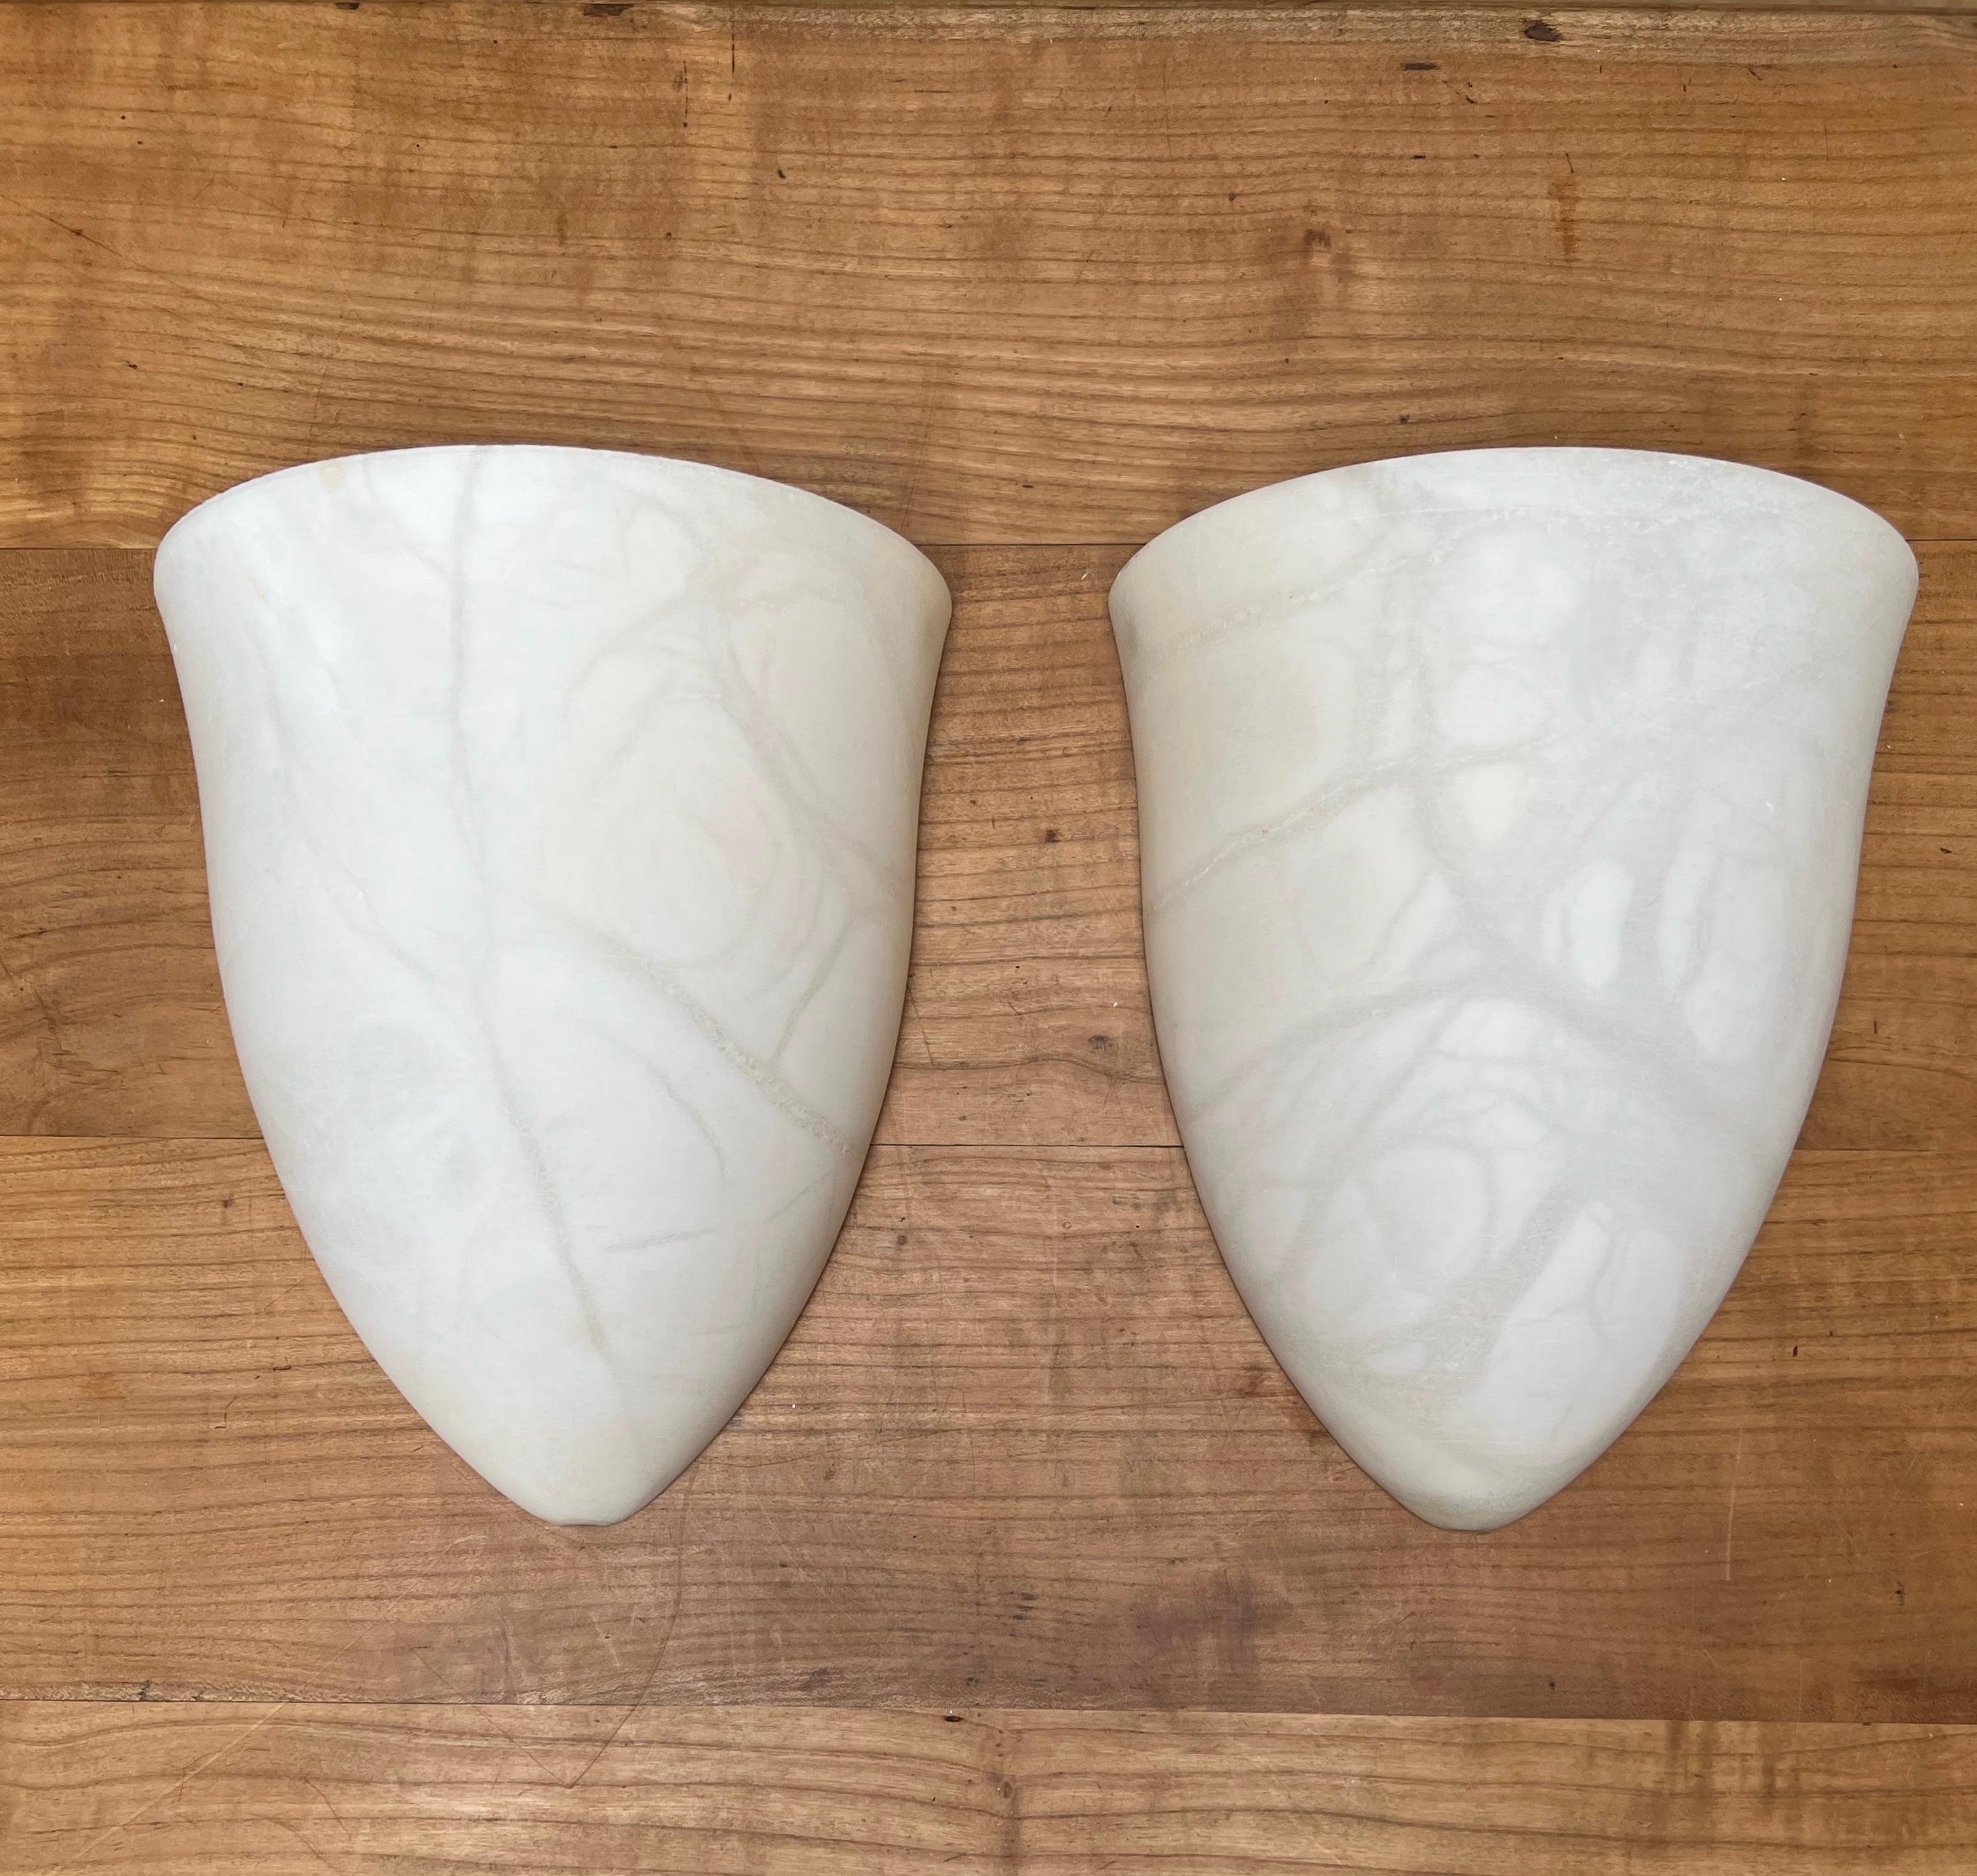 Handcrafted and very stylish pair of midcentury made alabaster wall lights.

If you are looking for a great shape and practical size pair of sconces to grace your living space then these natural mineral stone fixtures could be perfect. All